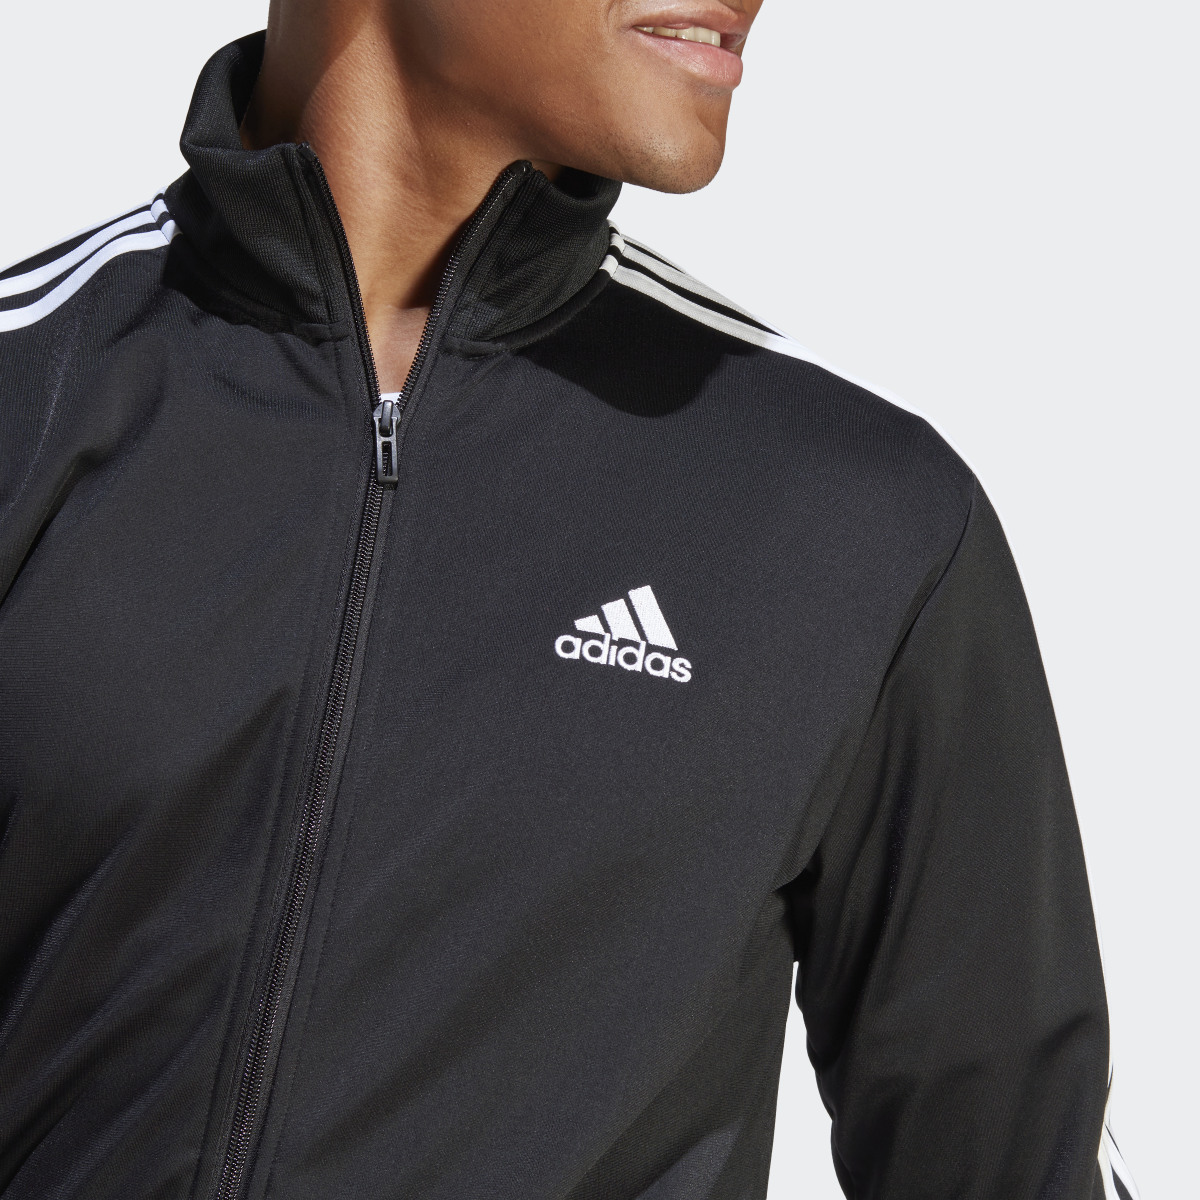 Adidas Basic 3-Stripes Tricot Track Suit. 10